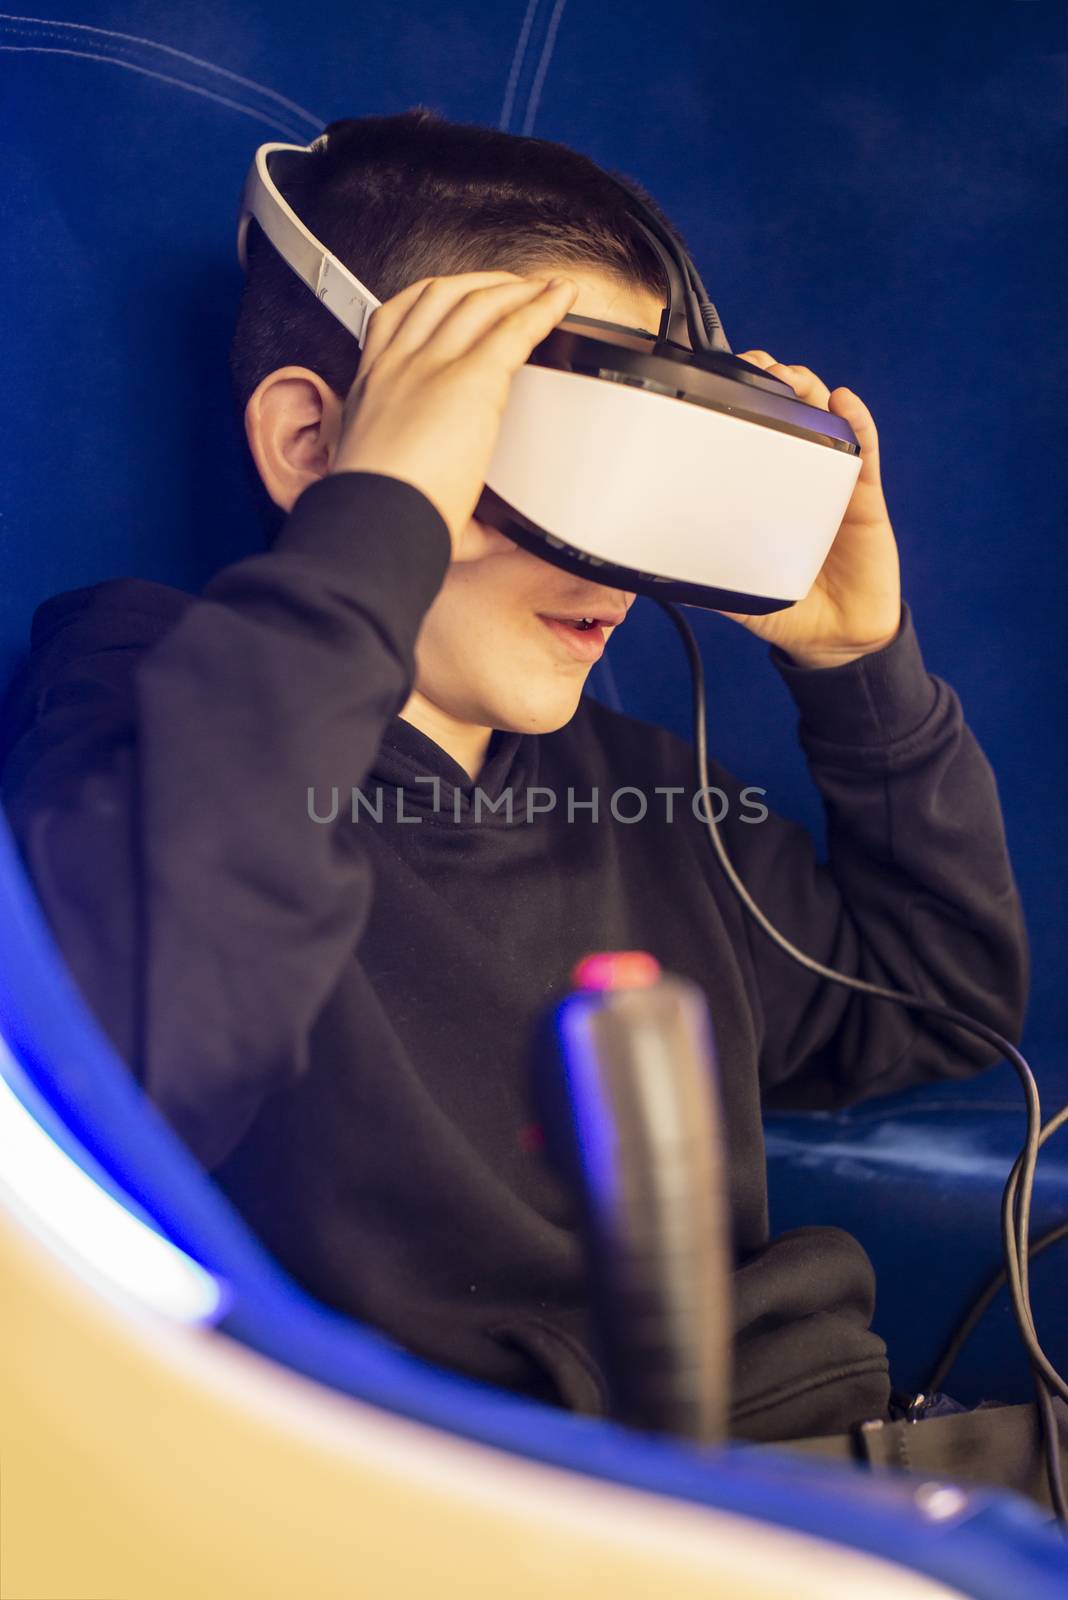 Child watching movie with VR glasses. Blue illuminated cabin with joysticks. Special effects. Technology and entertainment concept with virtual reality glasses.